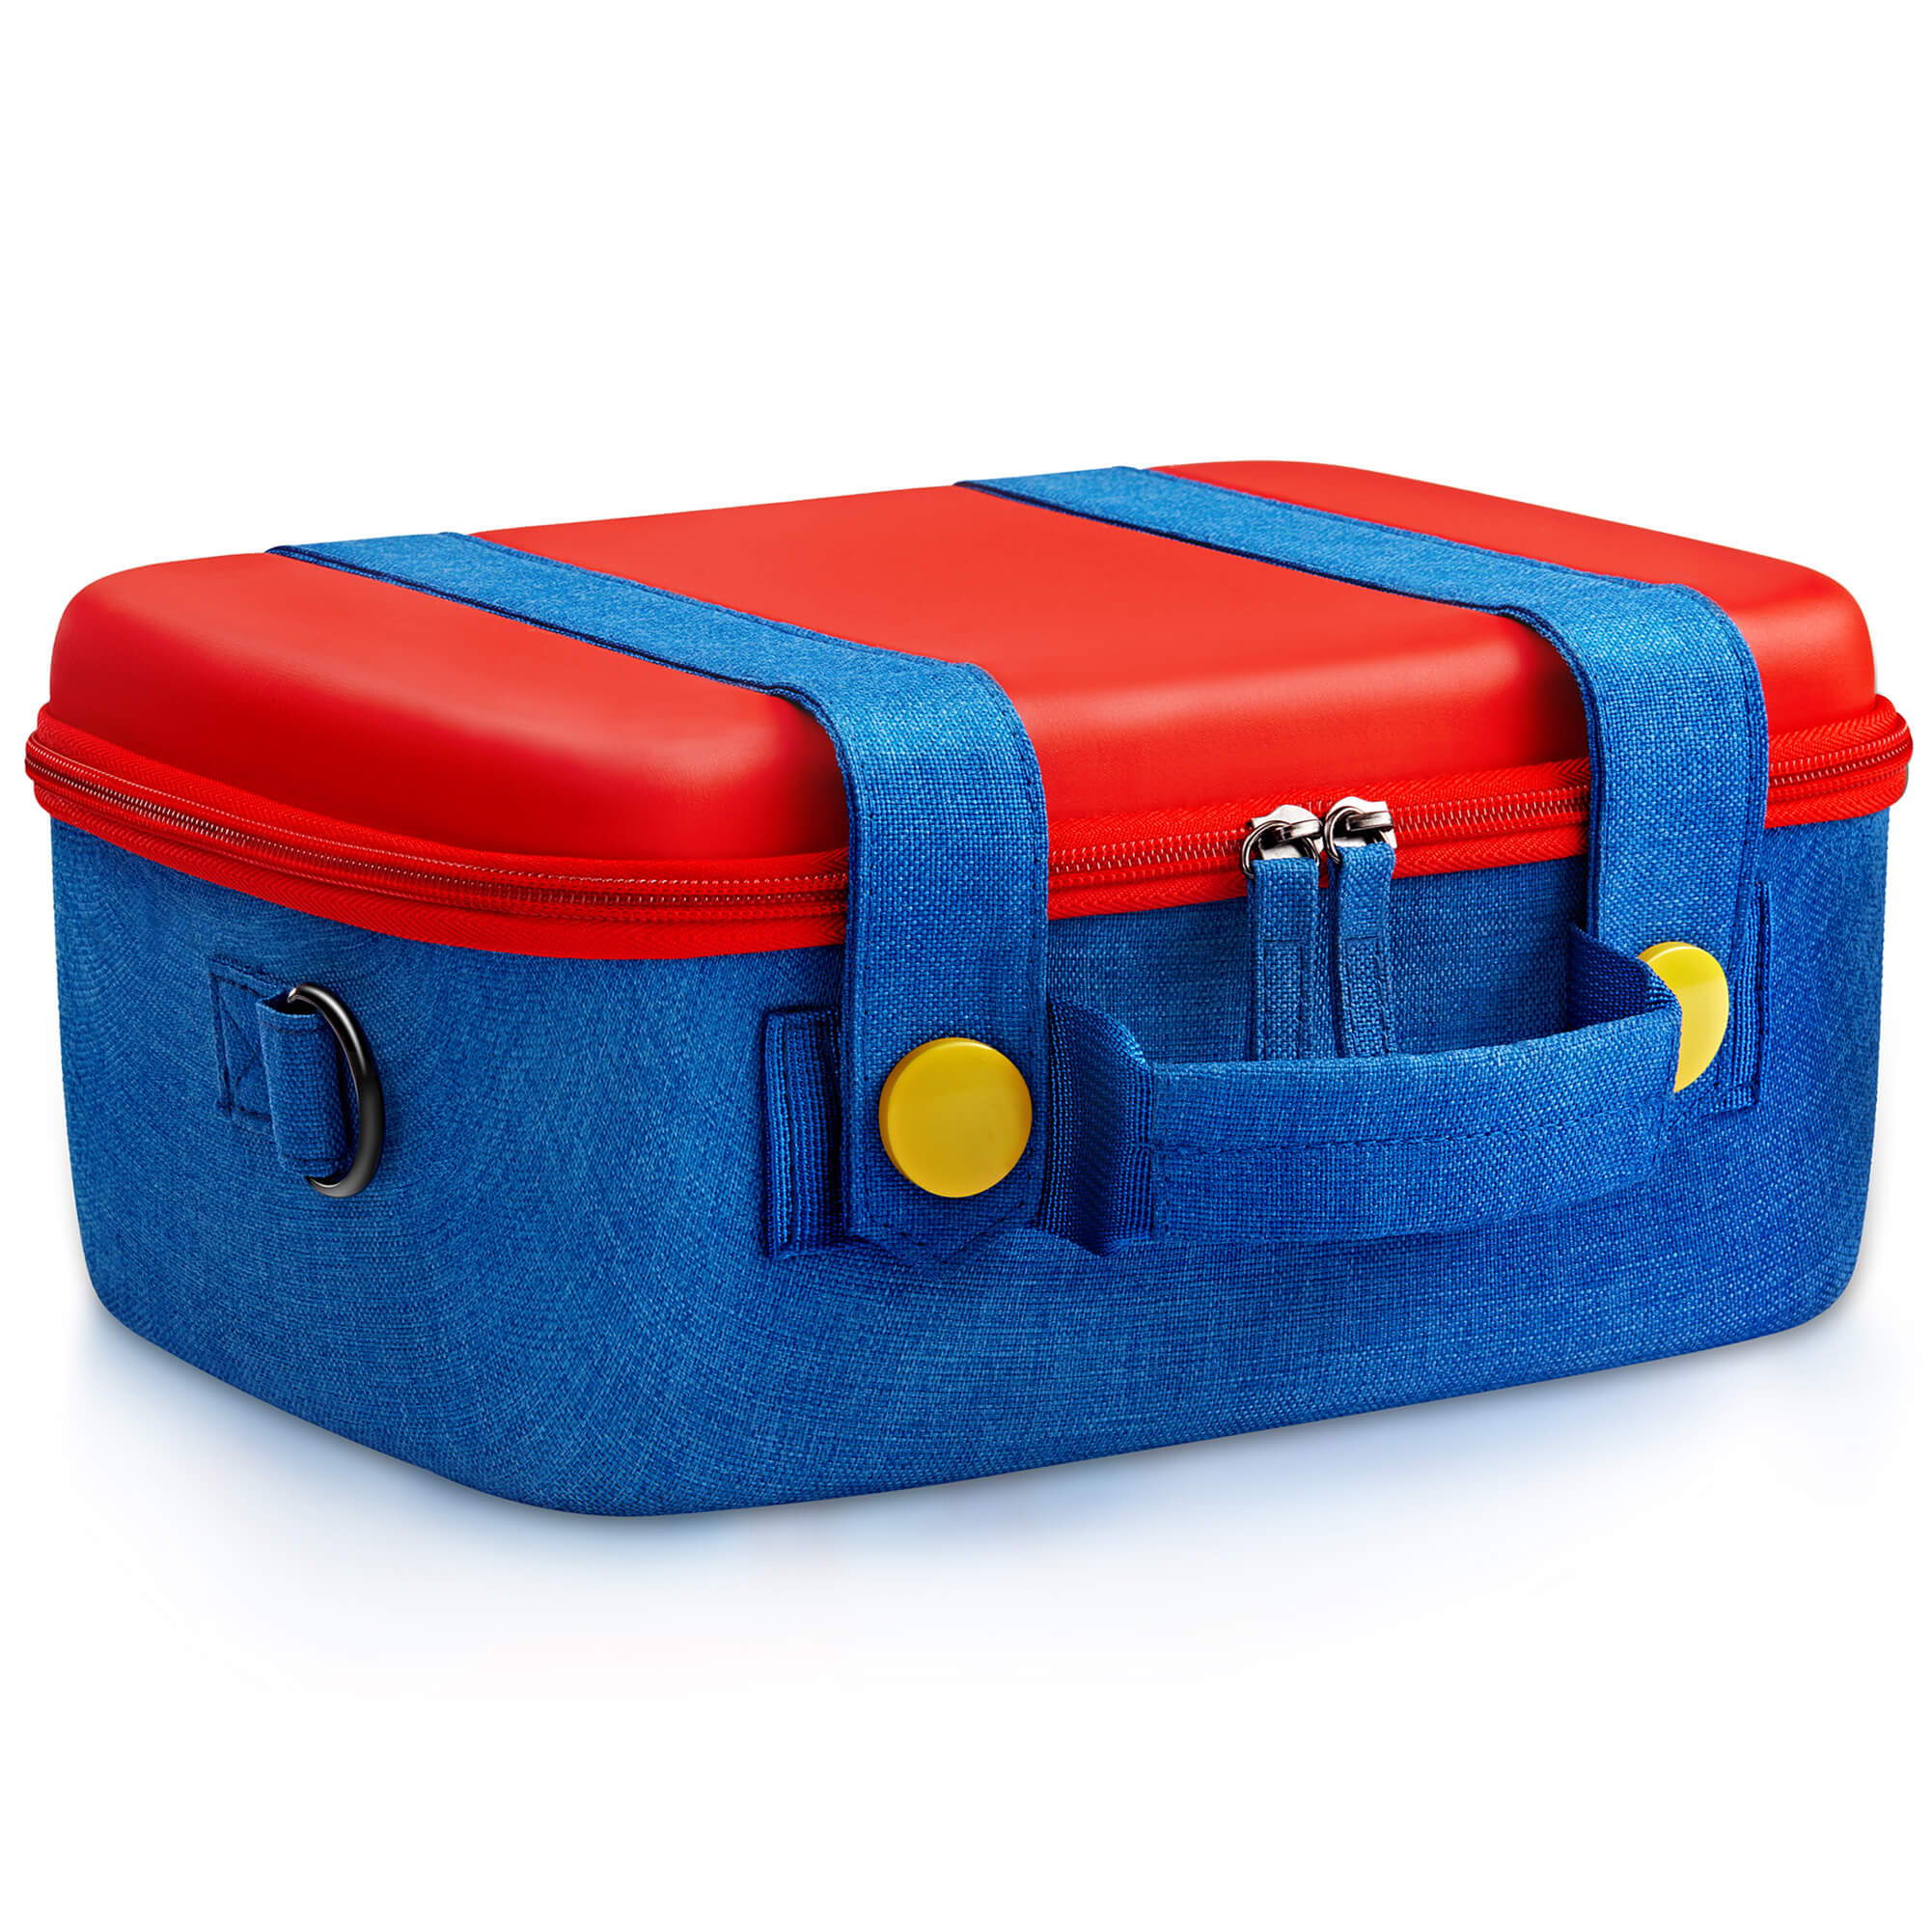 Travel Carrying Case for Nintendo Switch